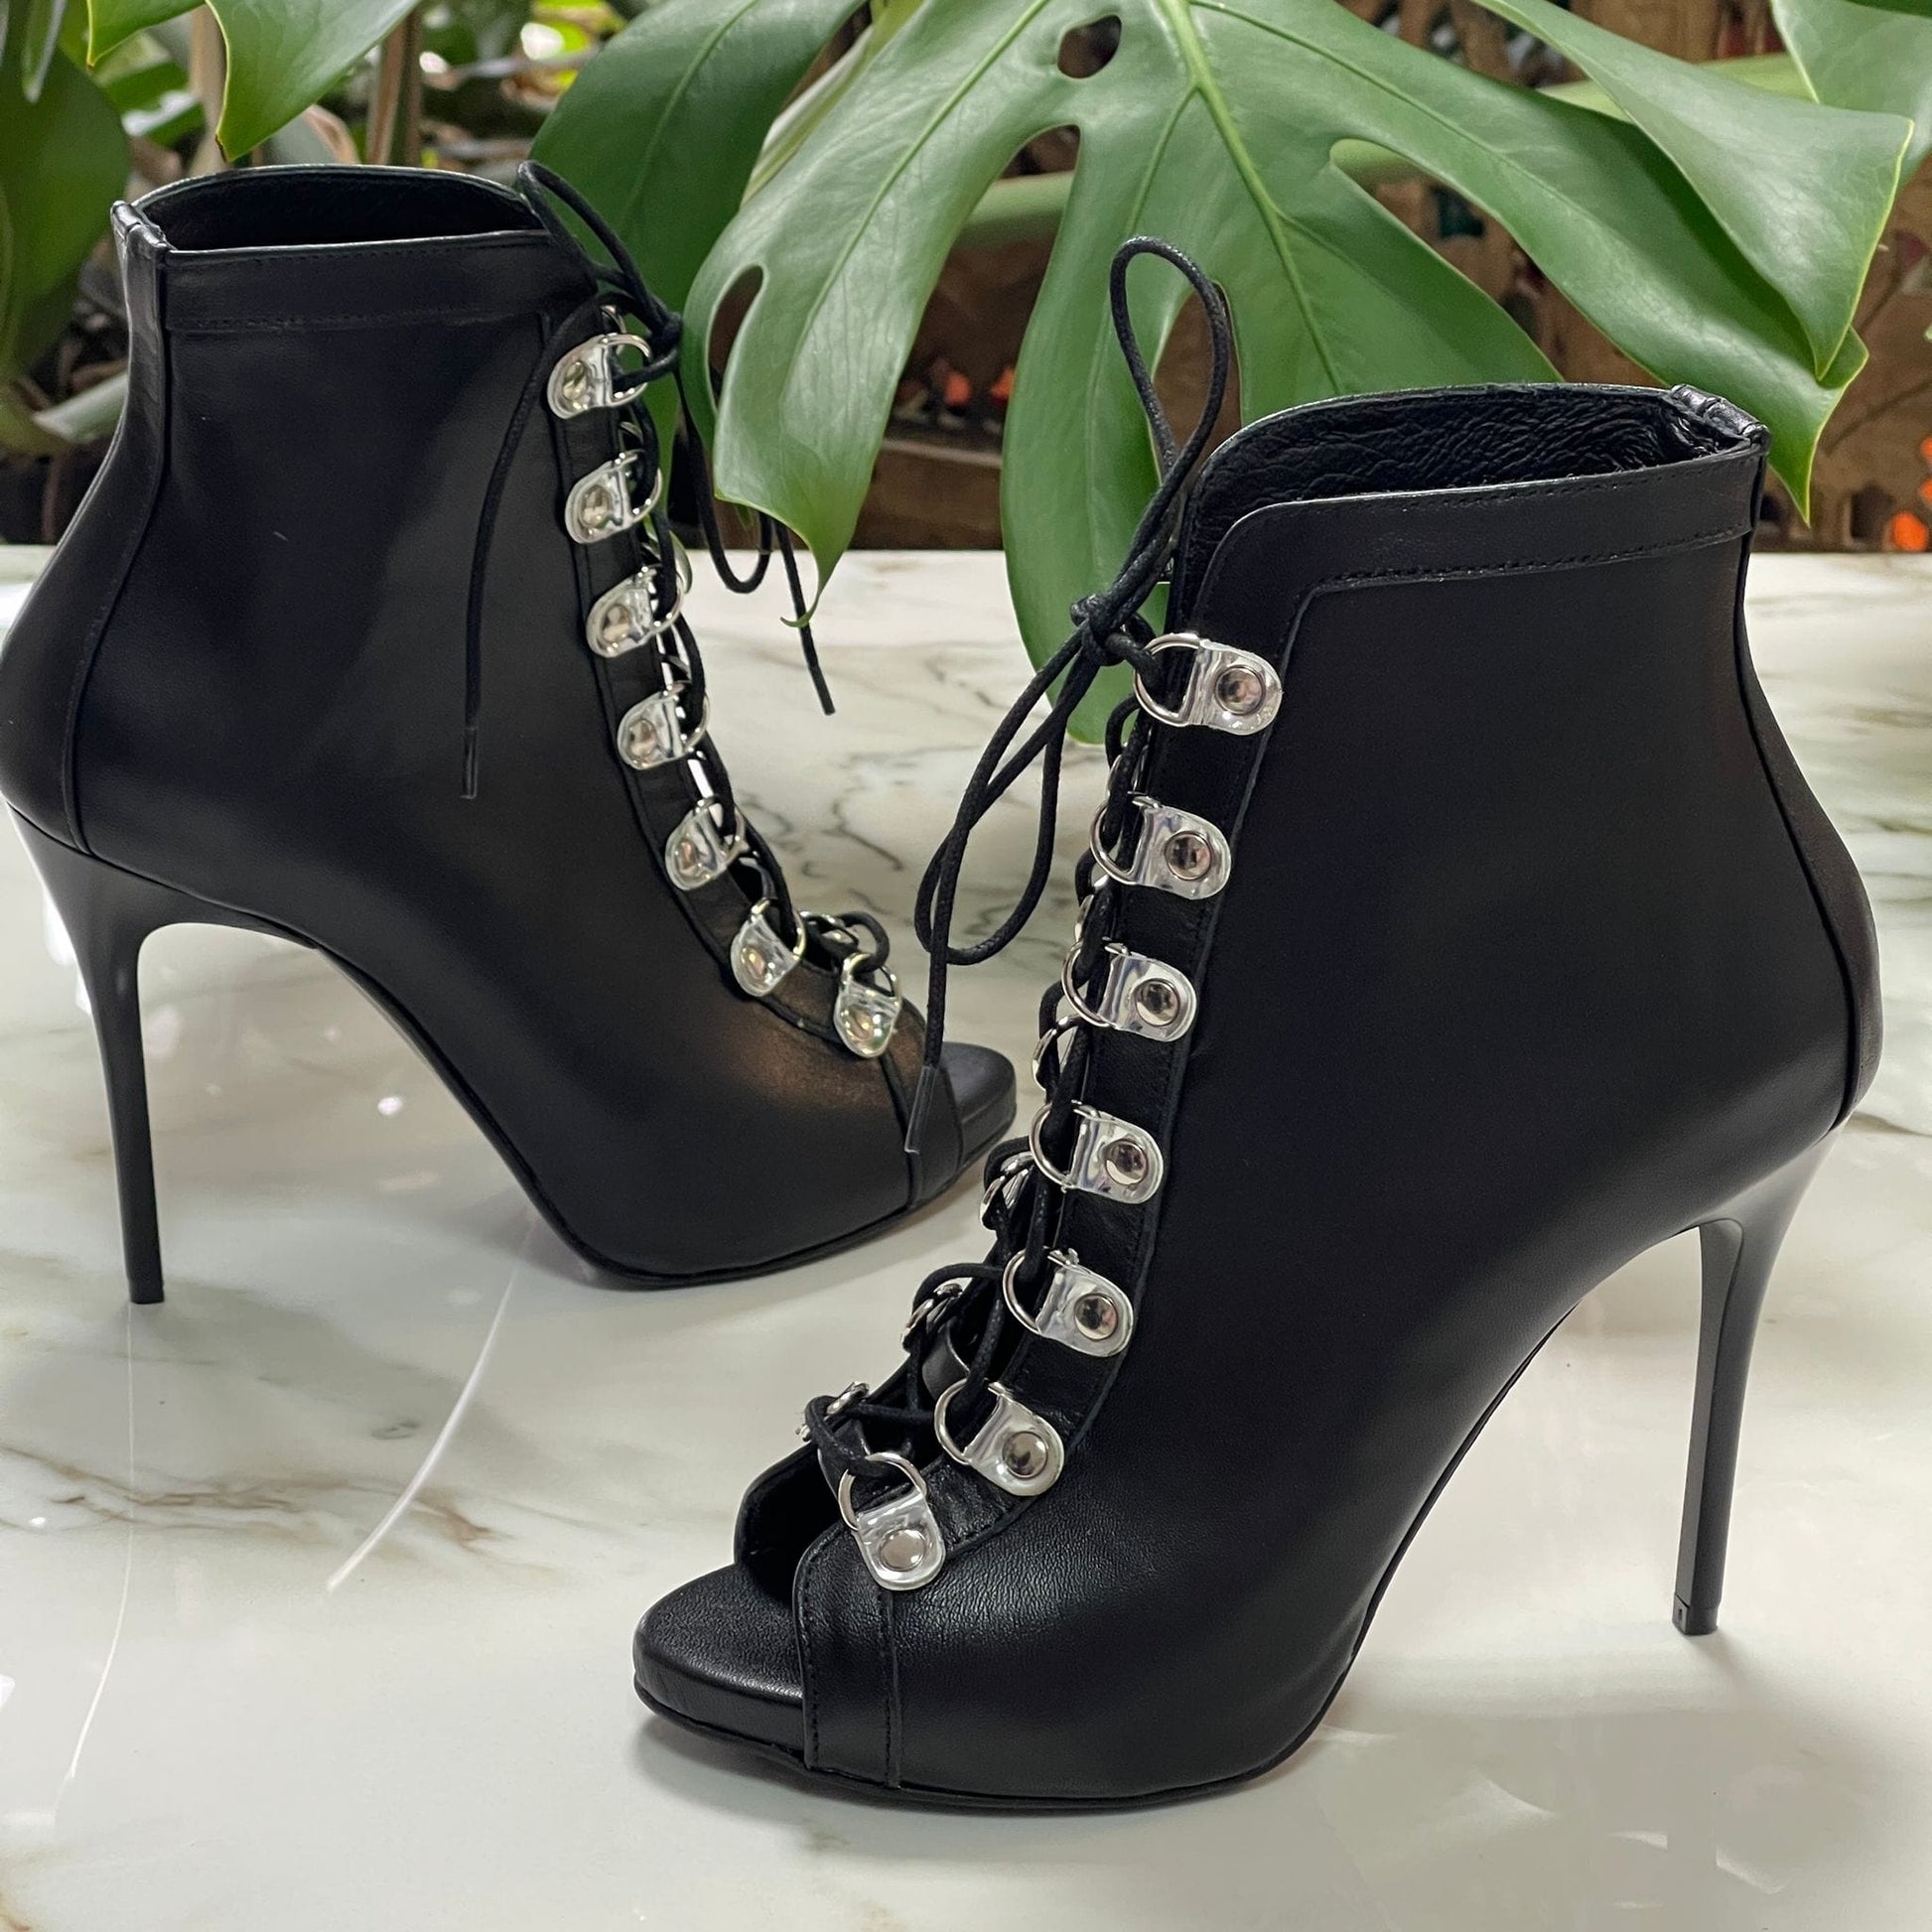 Black leather petite ankle boots